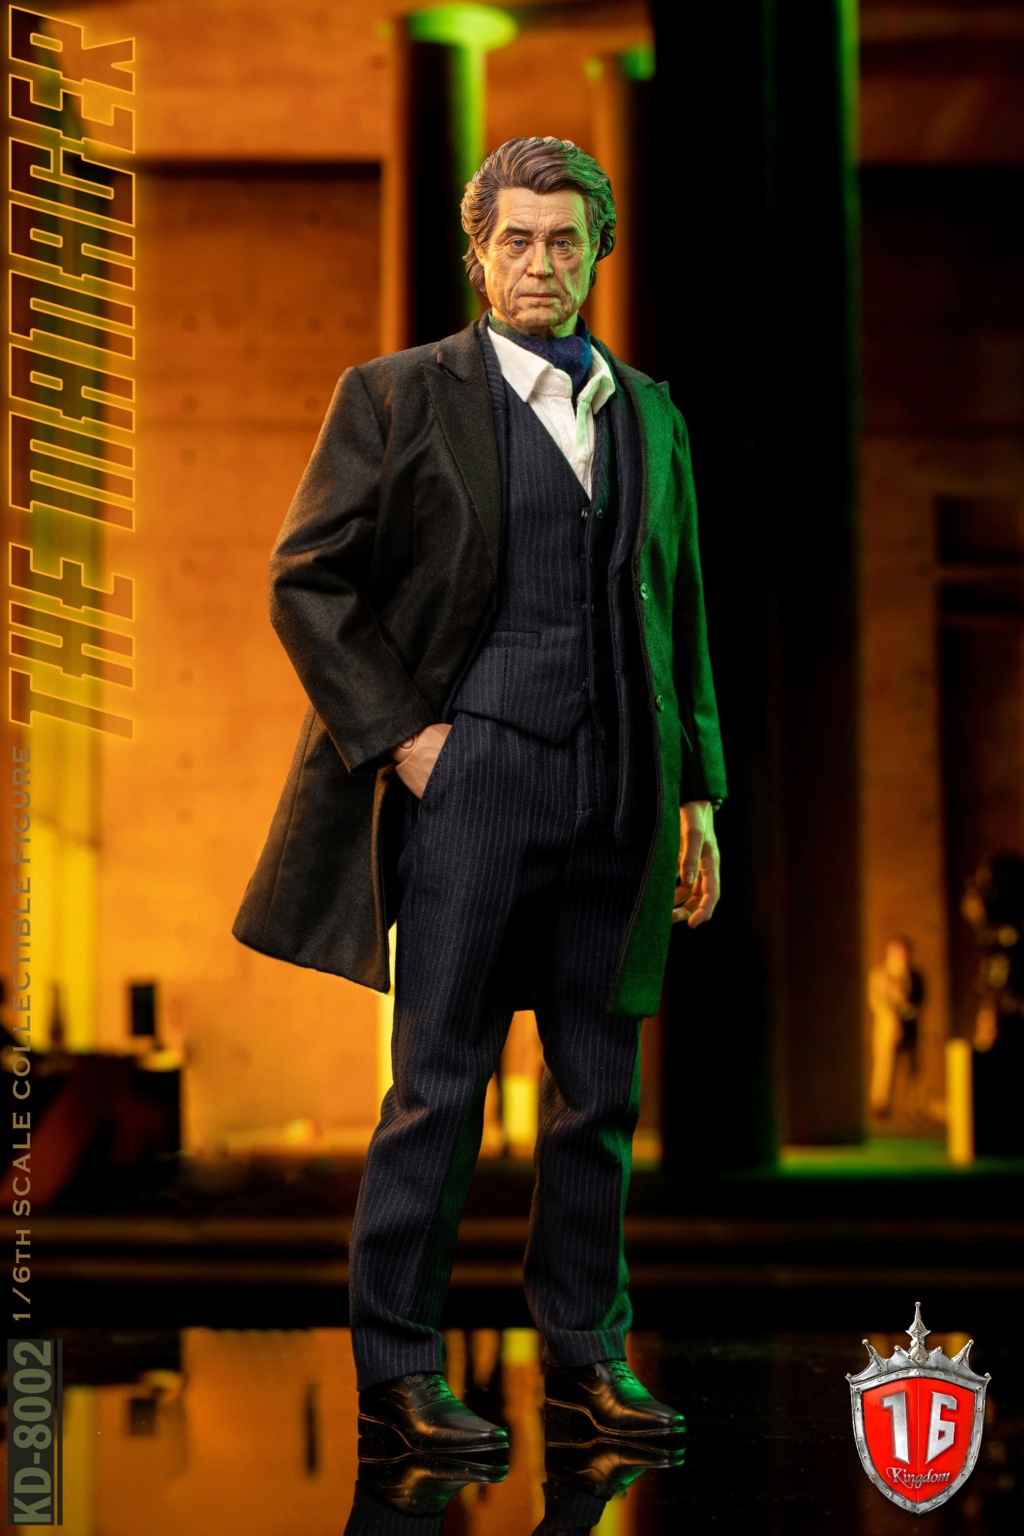 male - NEW PRODUCT: Kingdom: 1/6 The Manager Winston Action Figure KD-8002 11433810